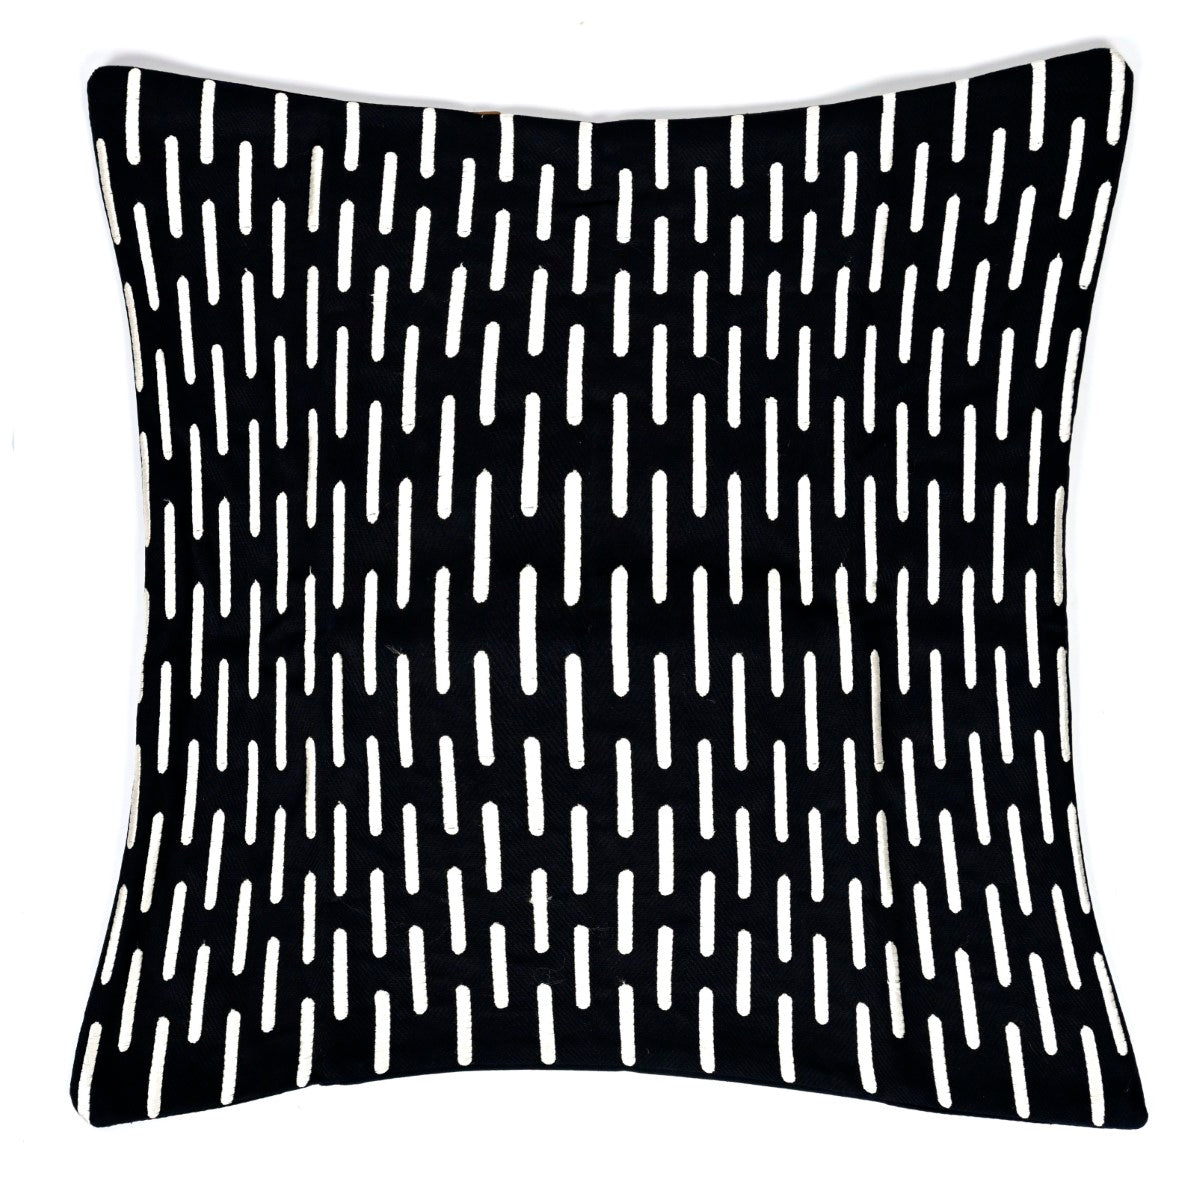 Blurred Lines Cushion Cover 18x18"